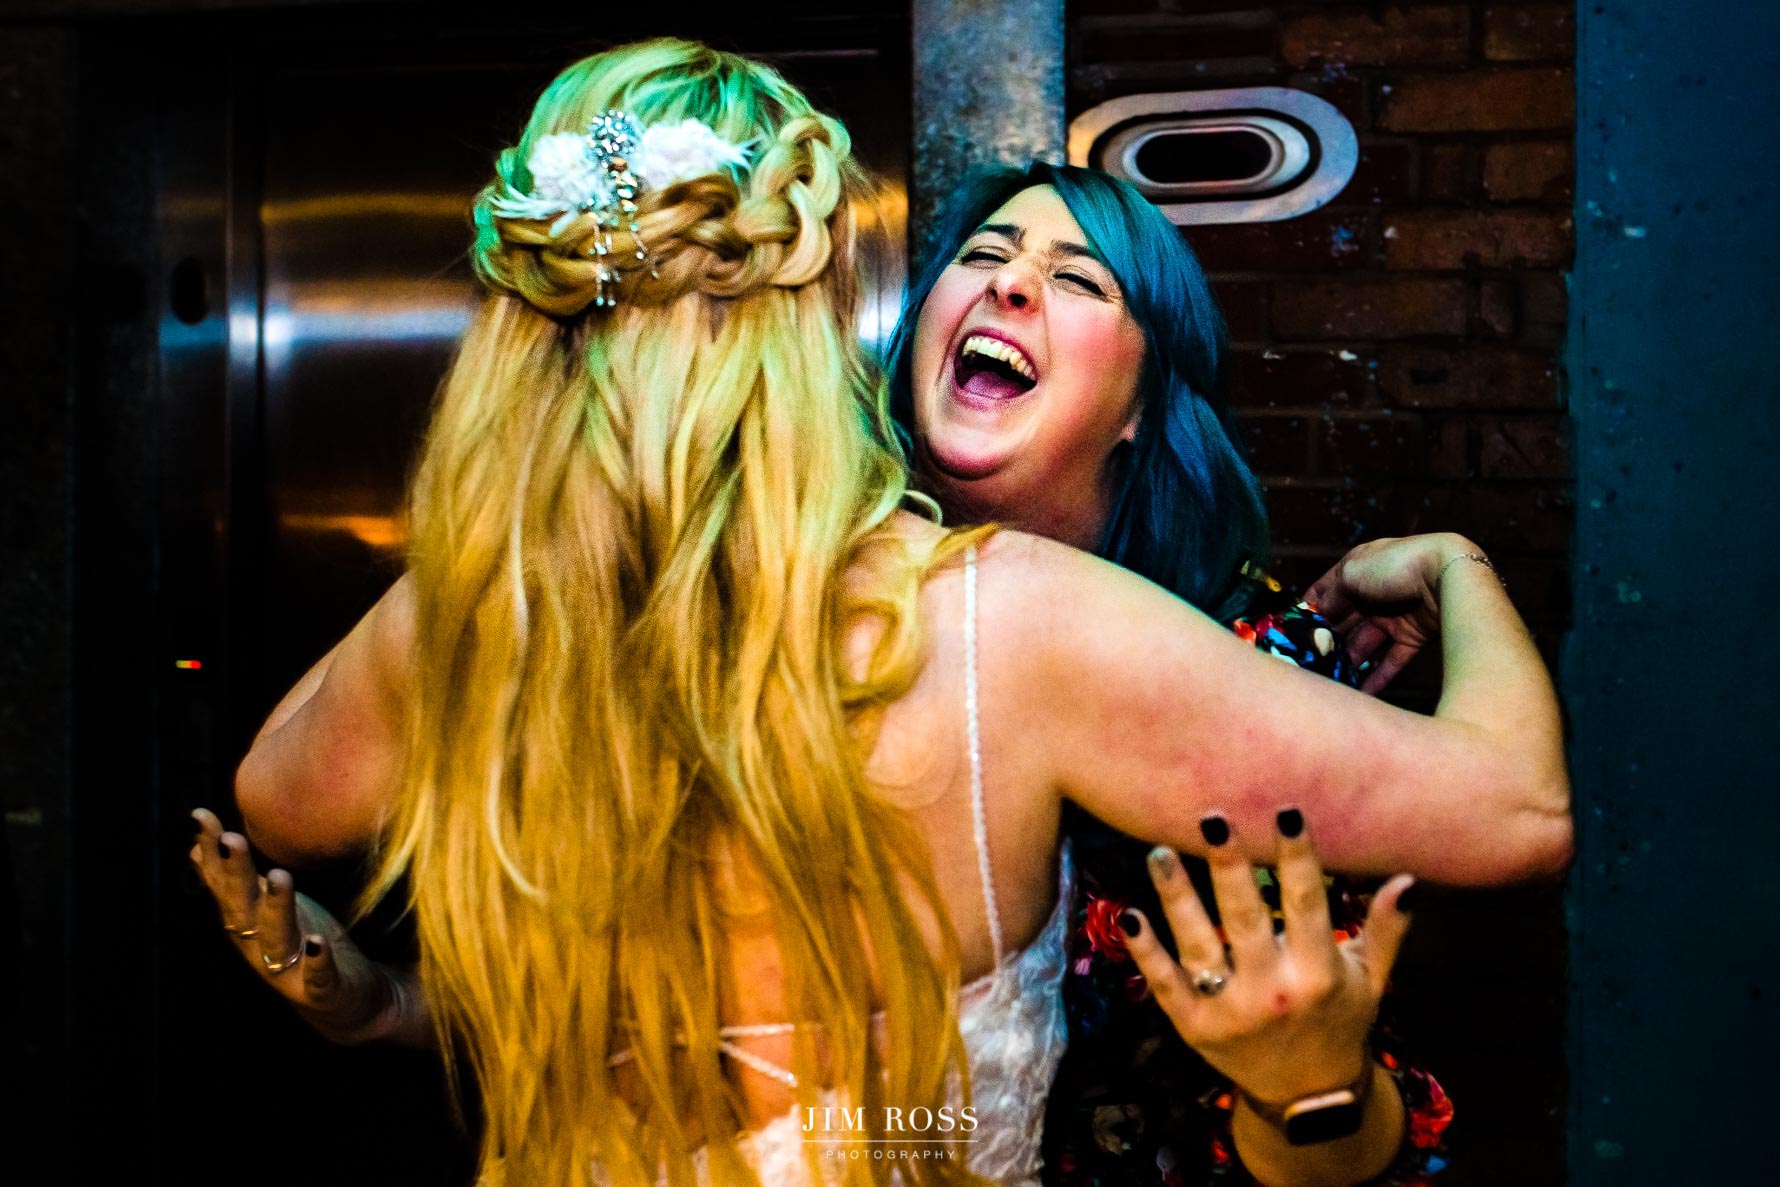 blue haired guest elated to hug bride